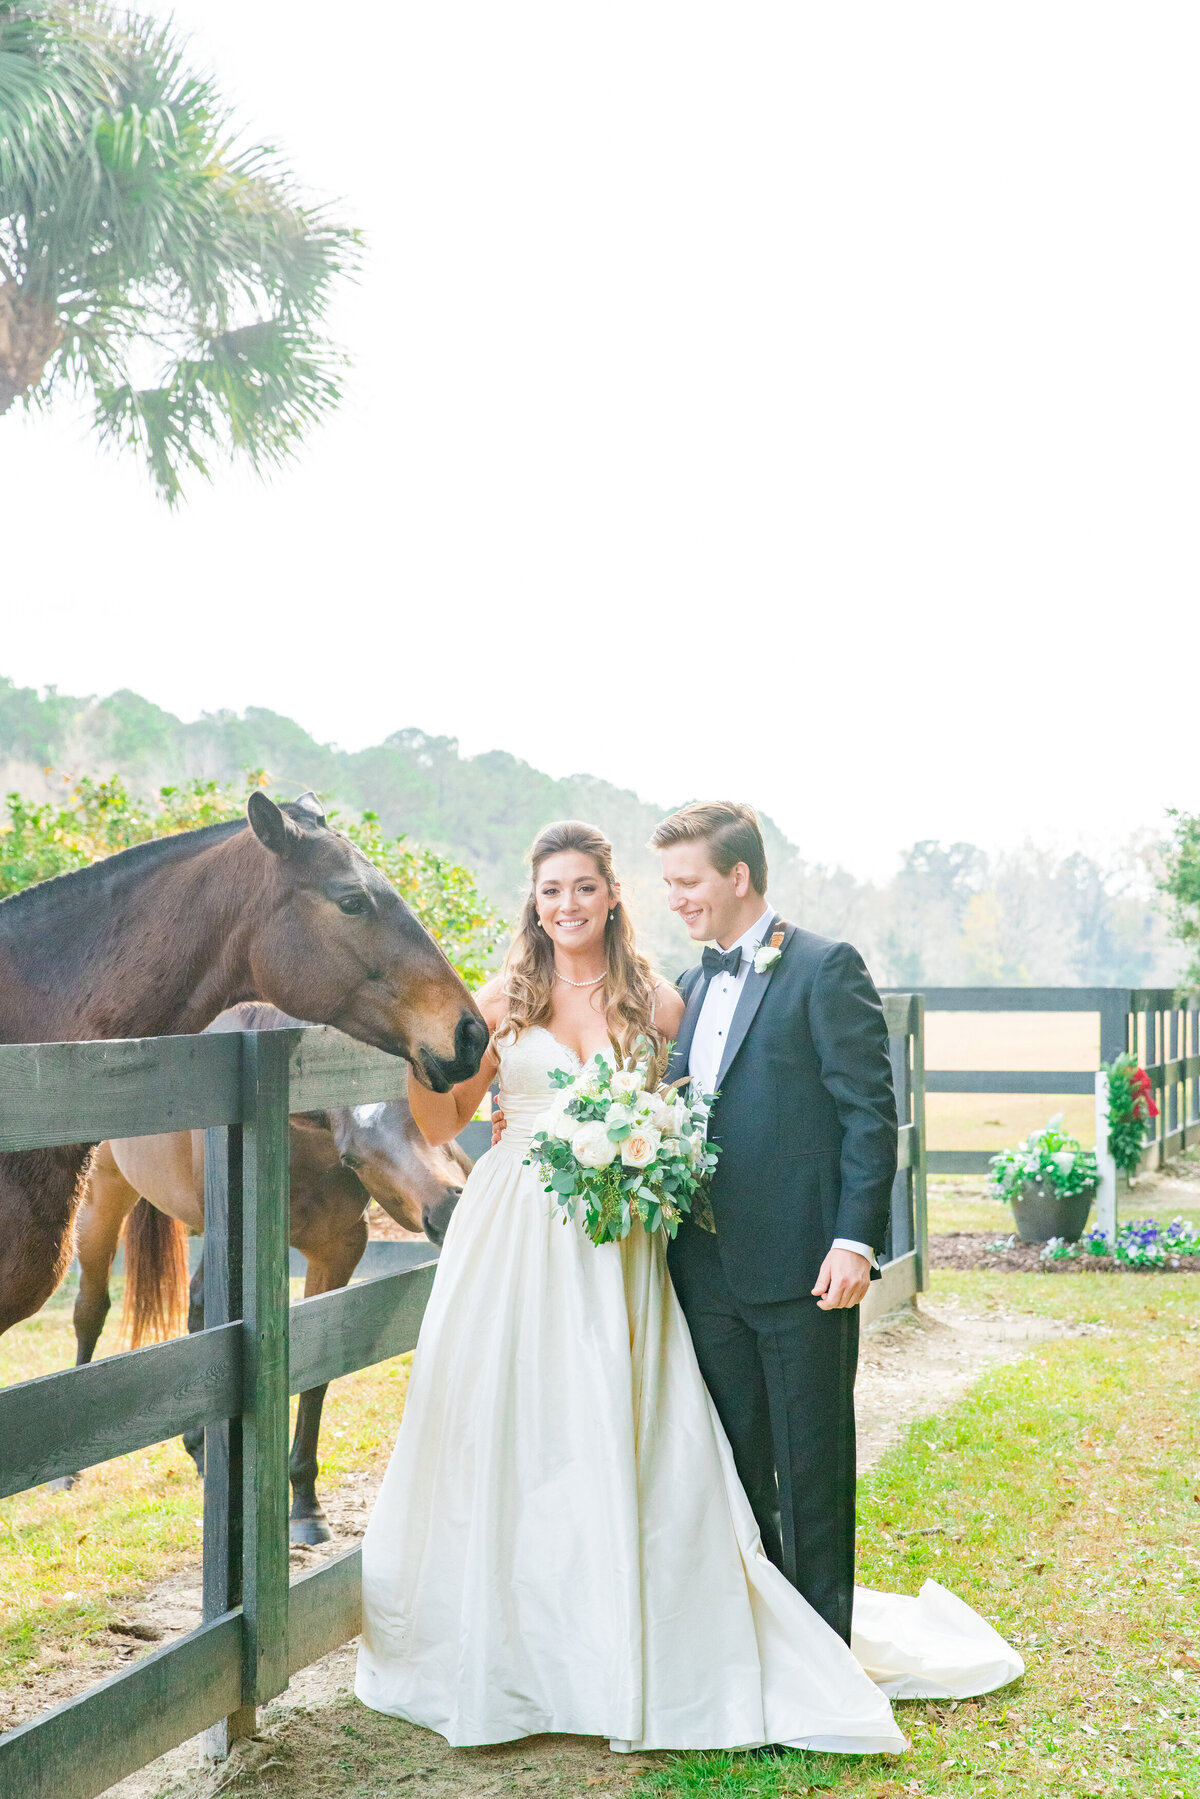 Boone Hall wedding photography by Dana Cubbage